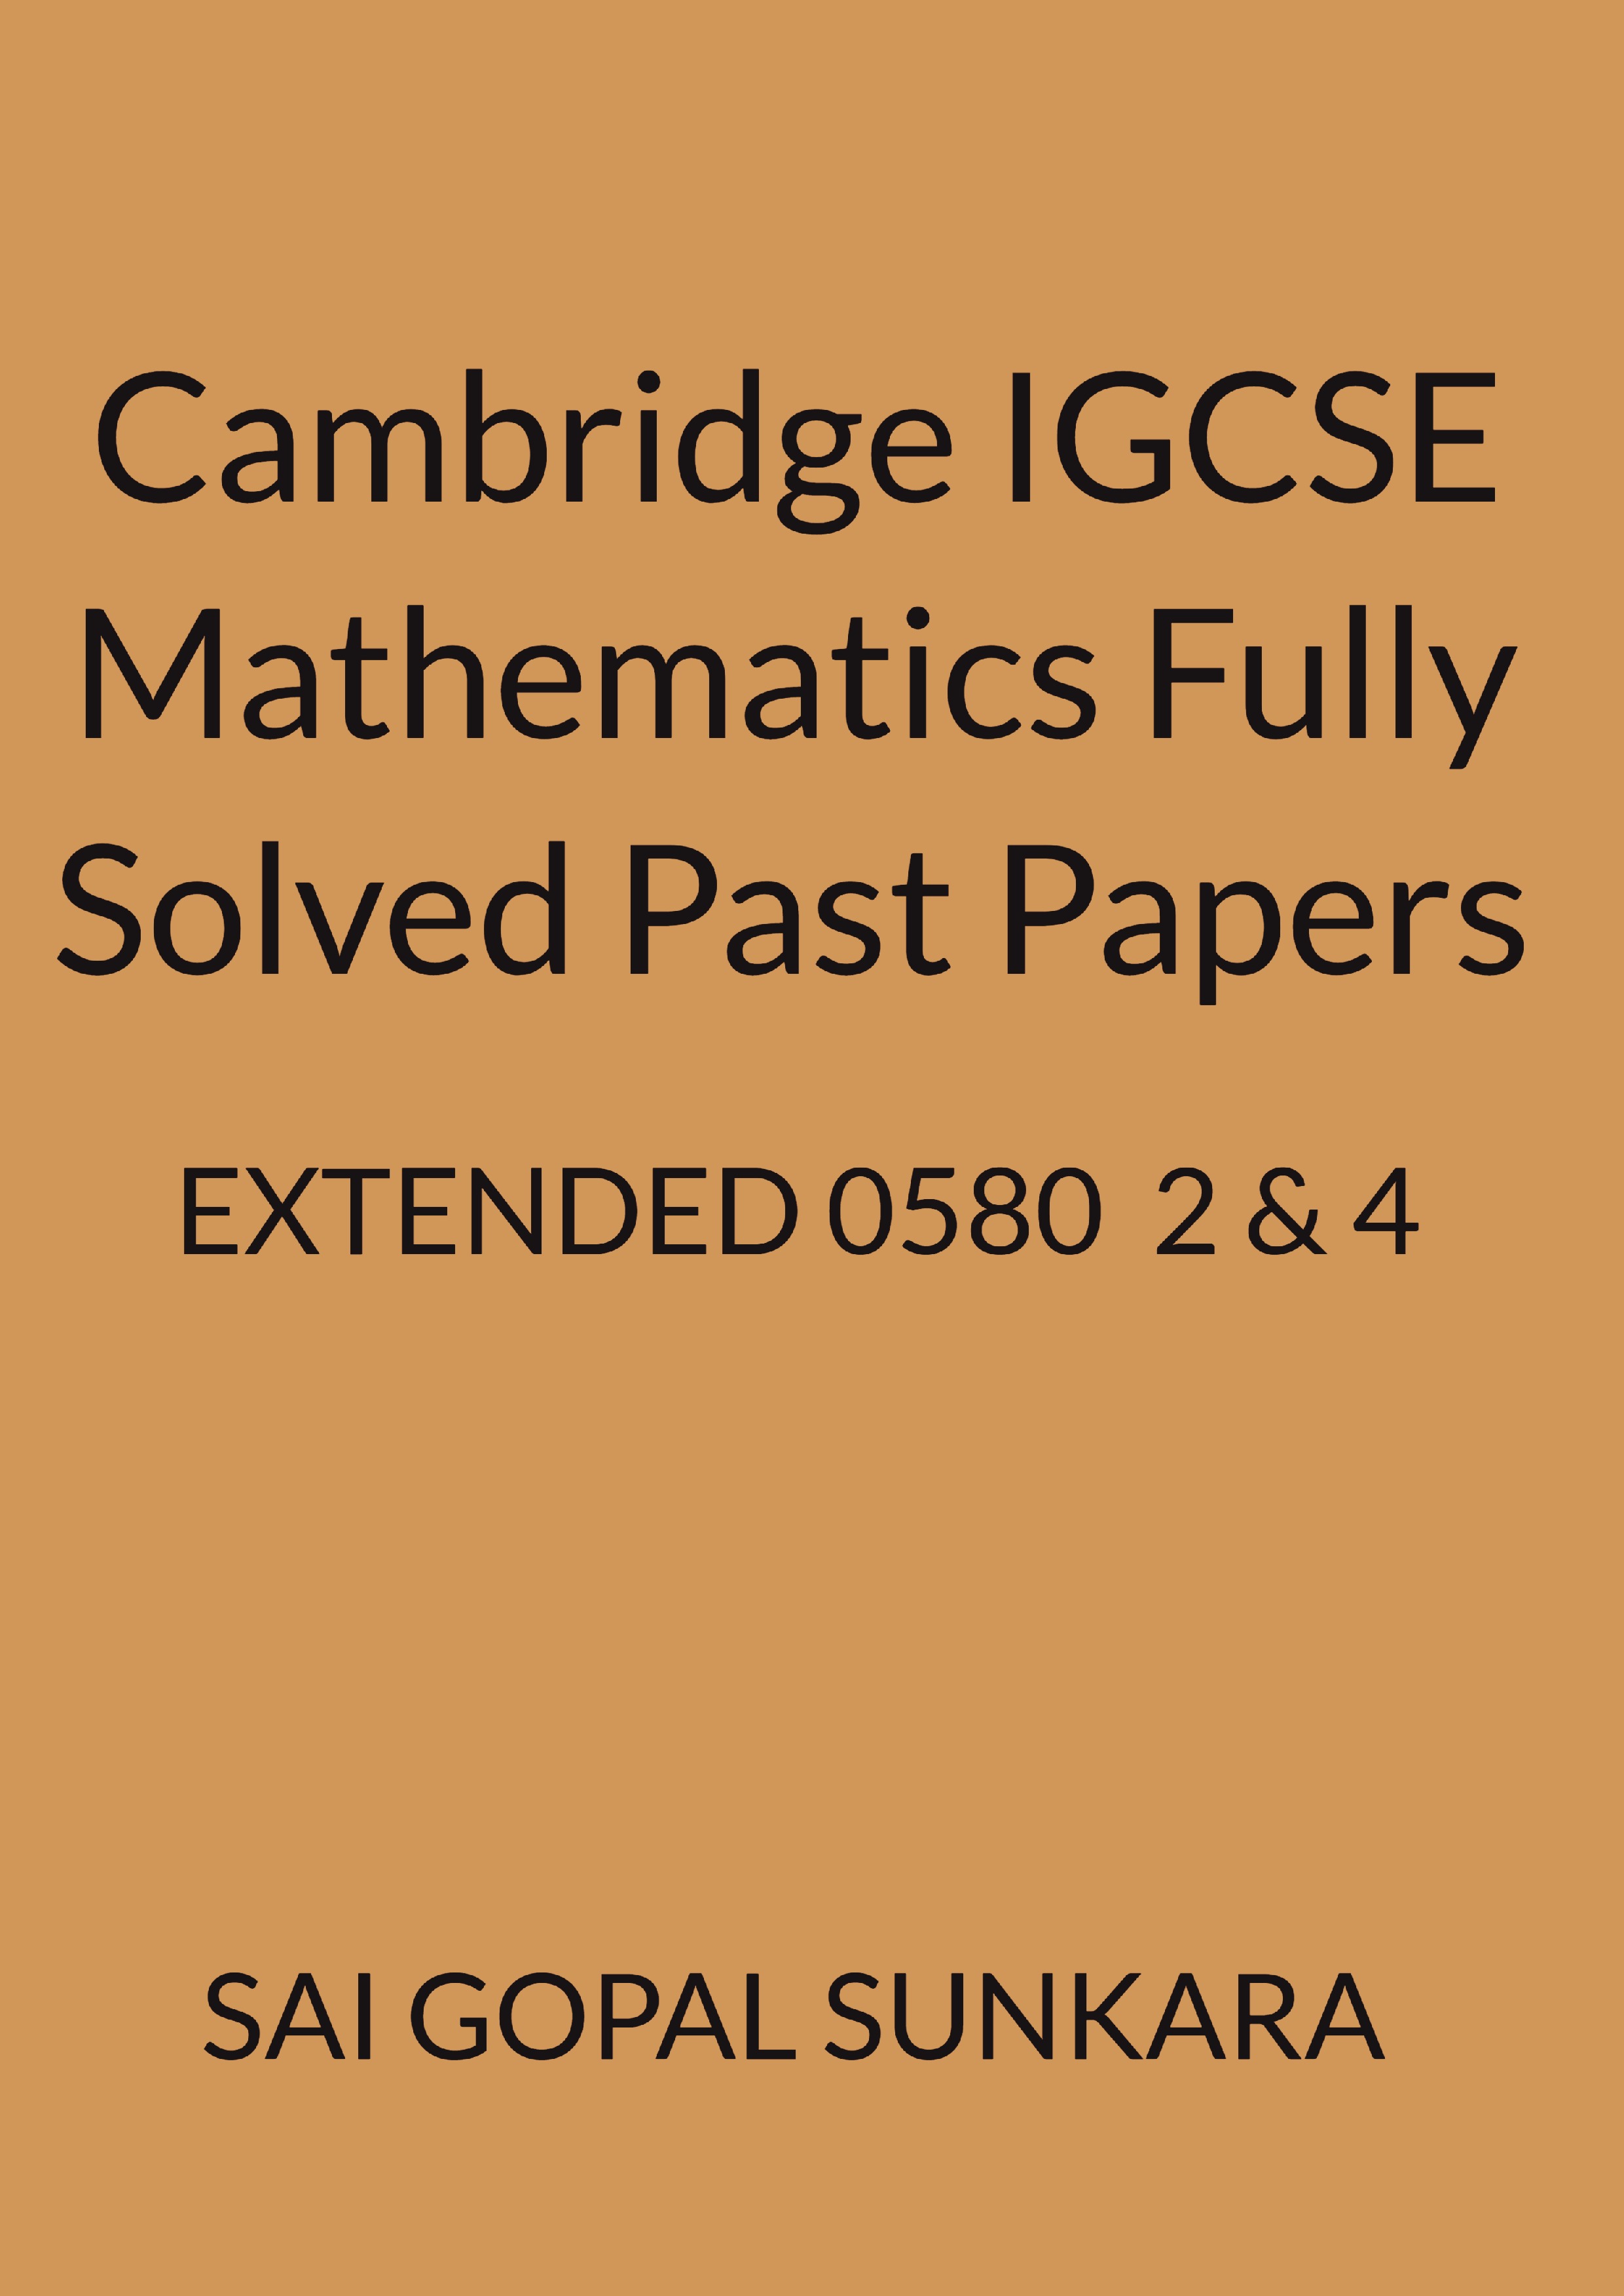 Cambridge Igcse Mathematics Fully Solved Past Papers Extended Paper 2 ...